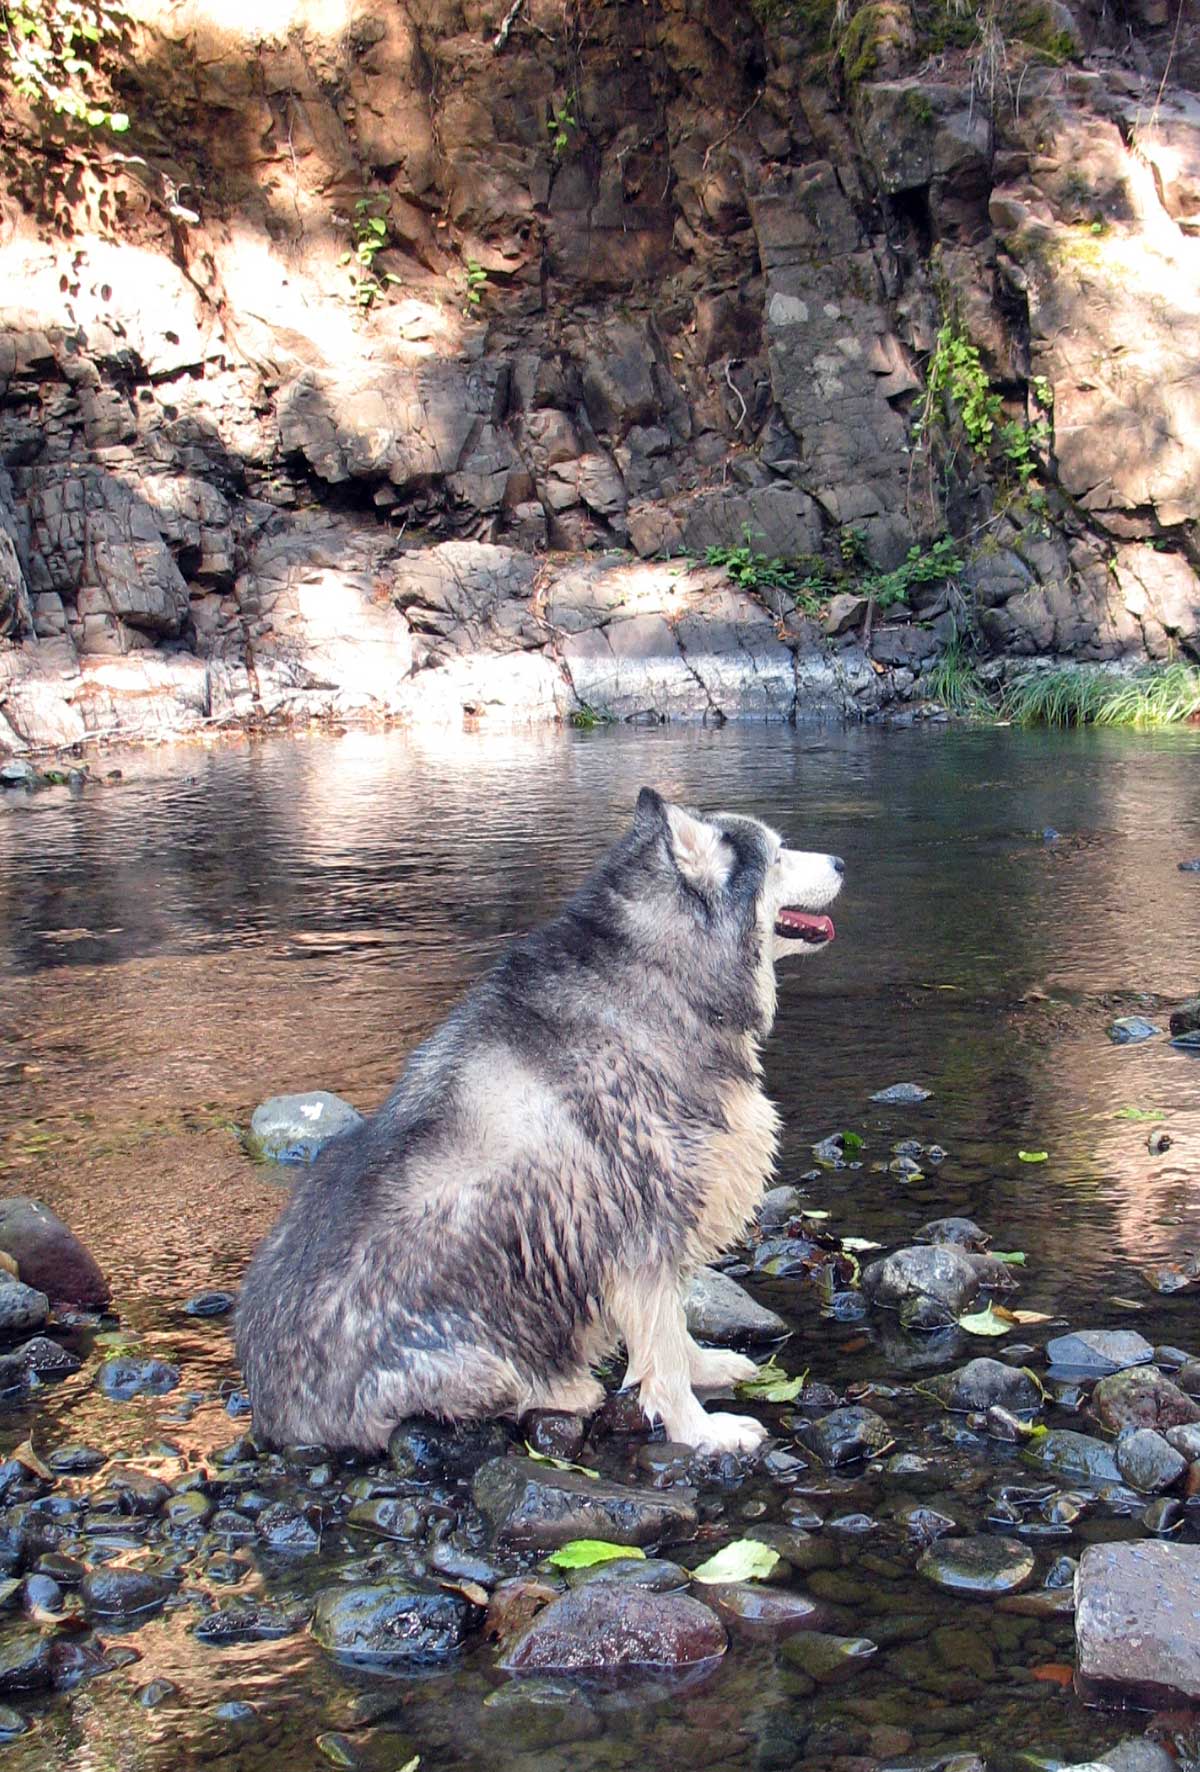 Loki basking in the afternoon sunlight after swimming in his favorite pool at the confluence of the North Fork and the Salmonberry River.